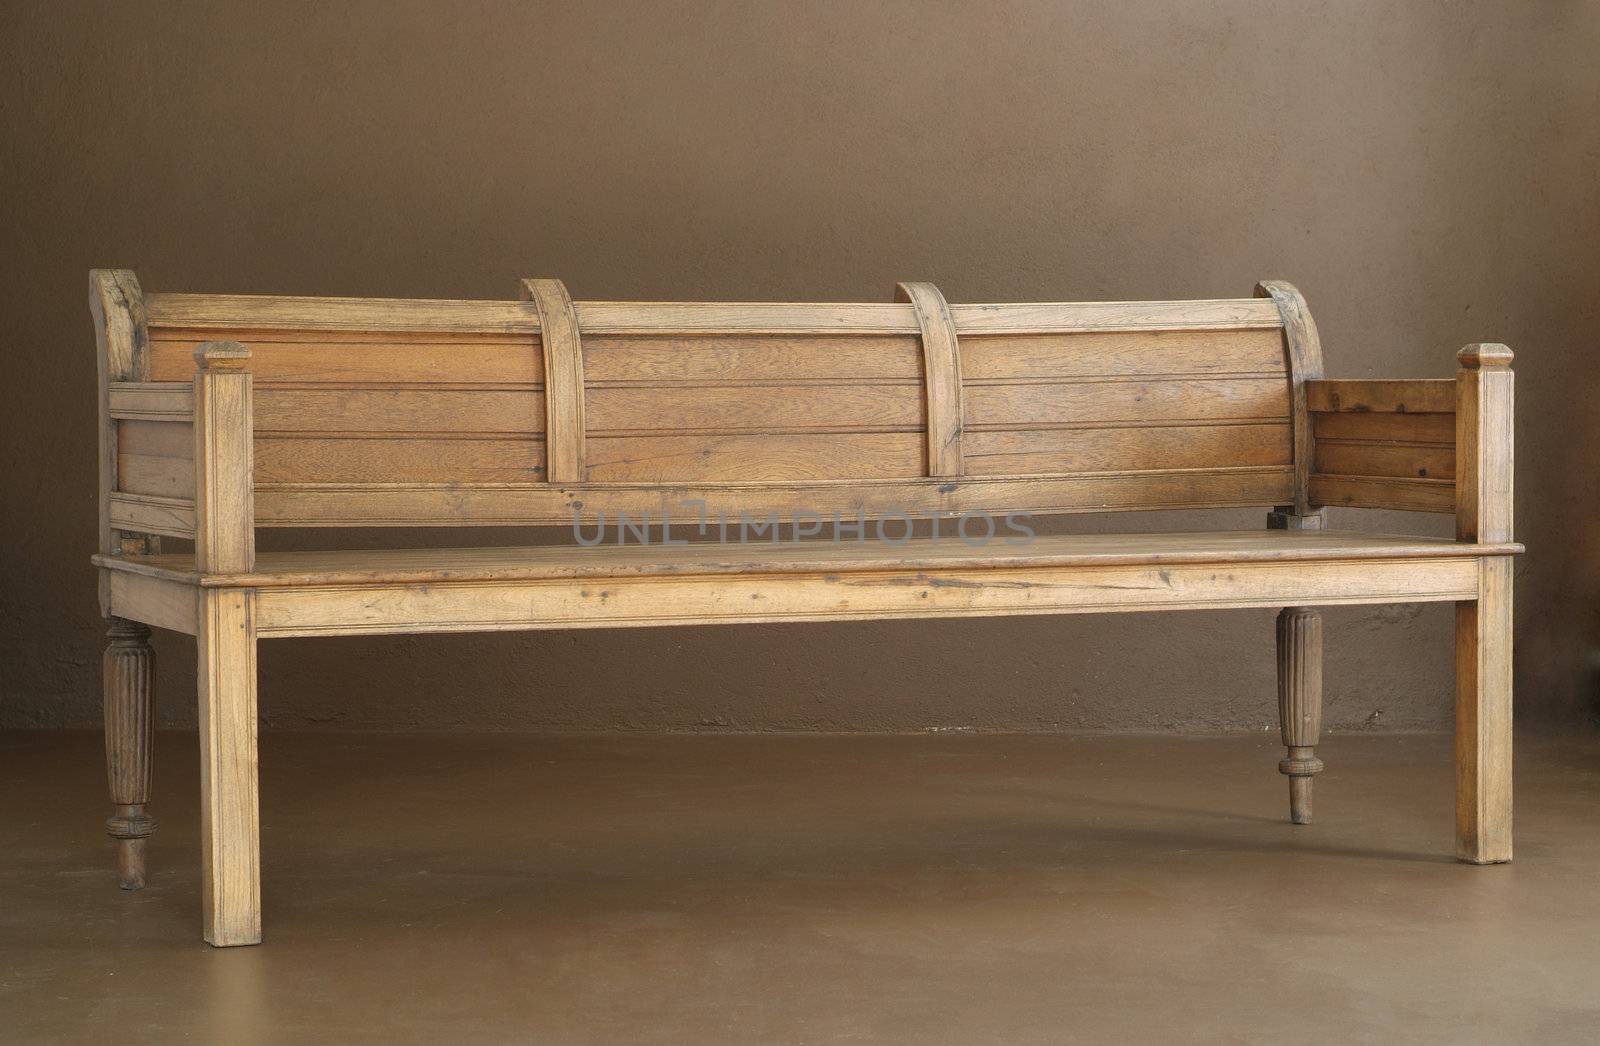 Classic wooden bench by alistaircotton